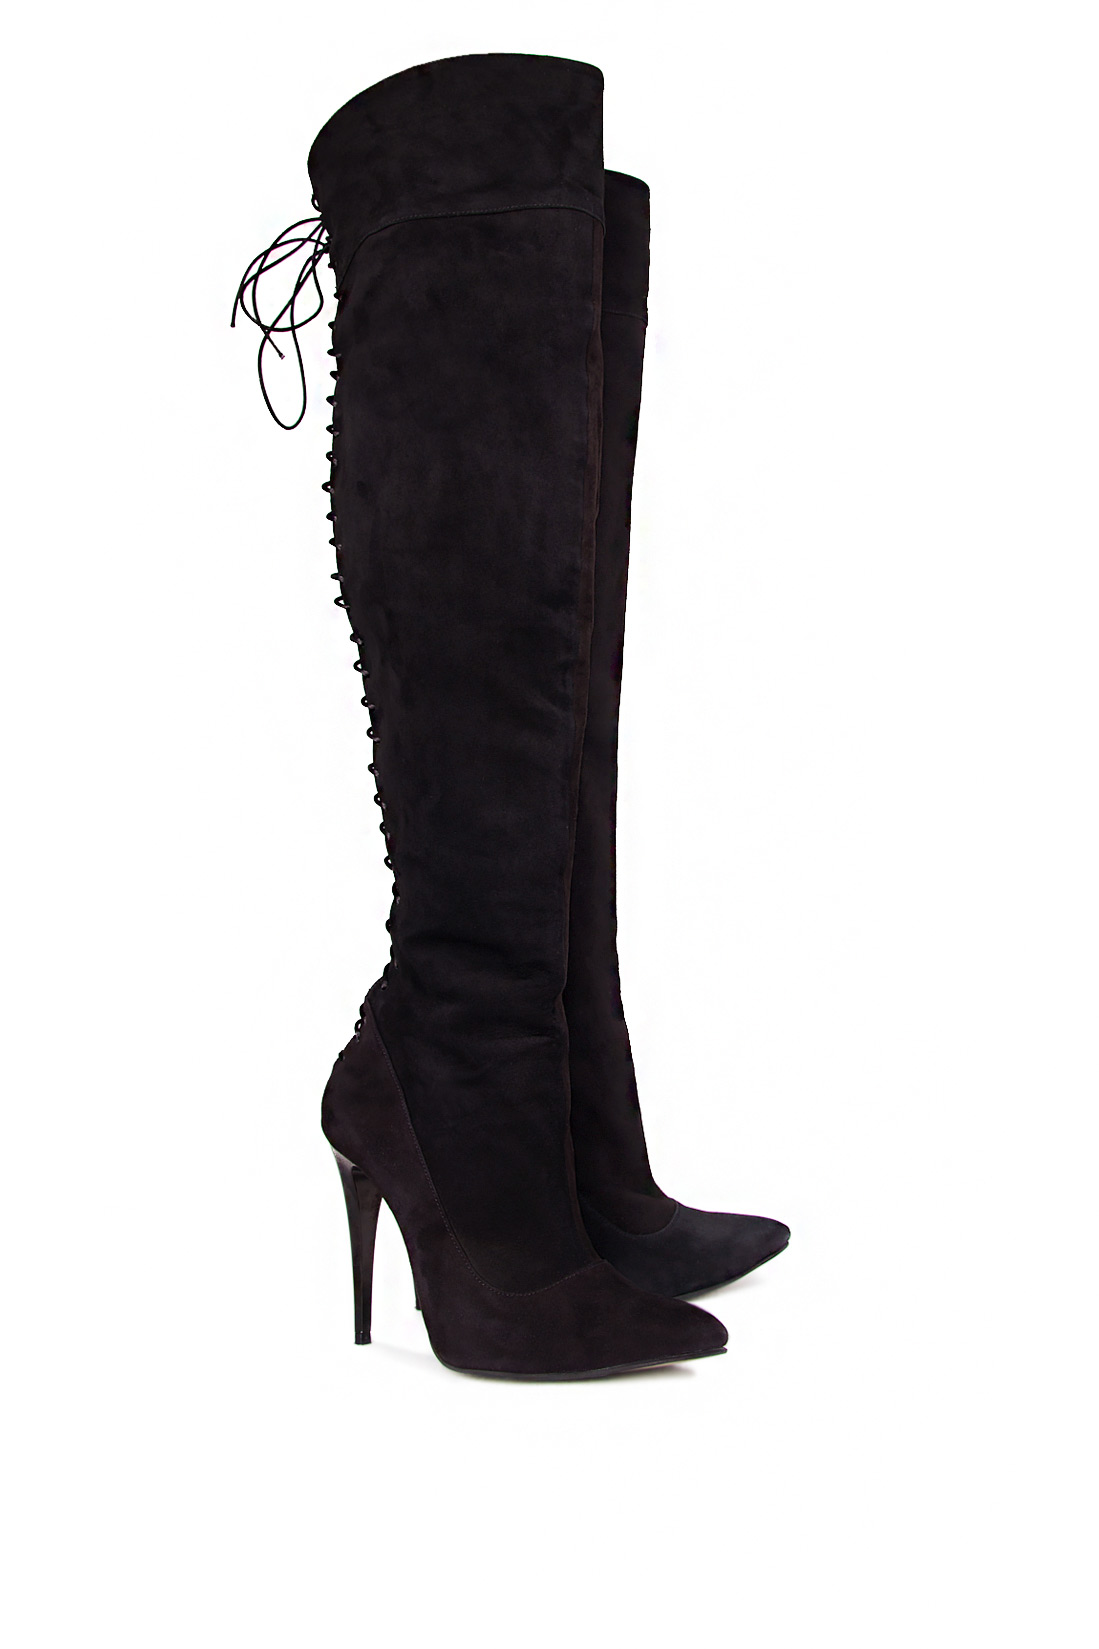 Lace-up suede over-the-knee boots Ana Kaloni image 1